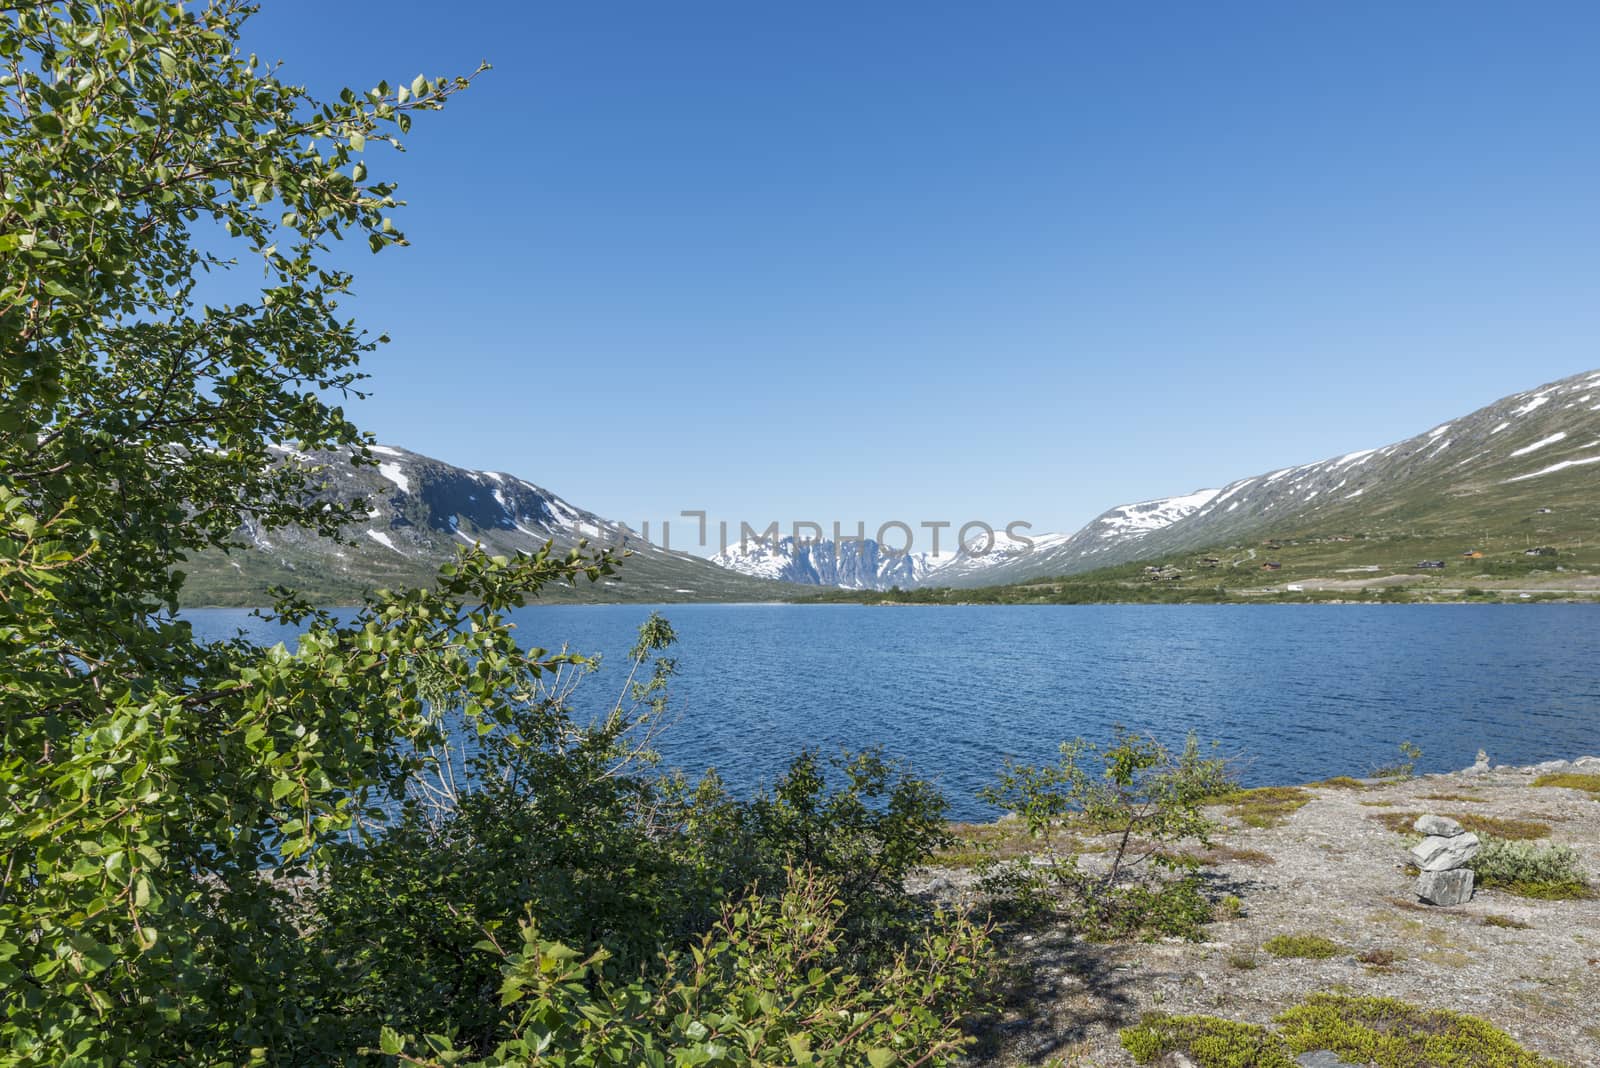 The famous road in Norway also called road 51 or the bygdin vegen near Bismo